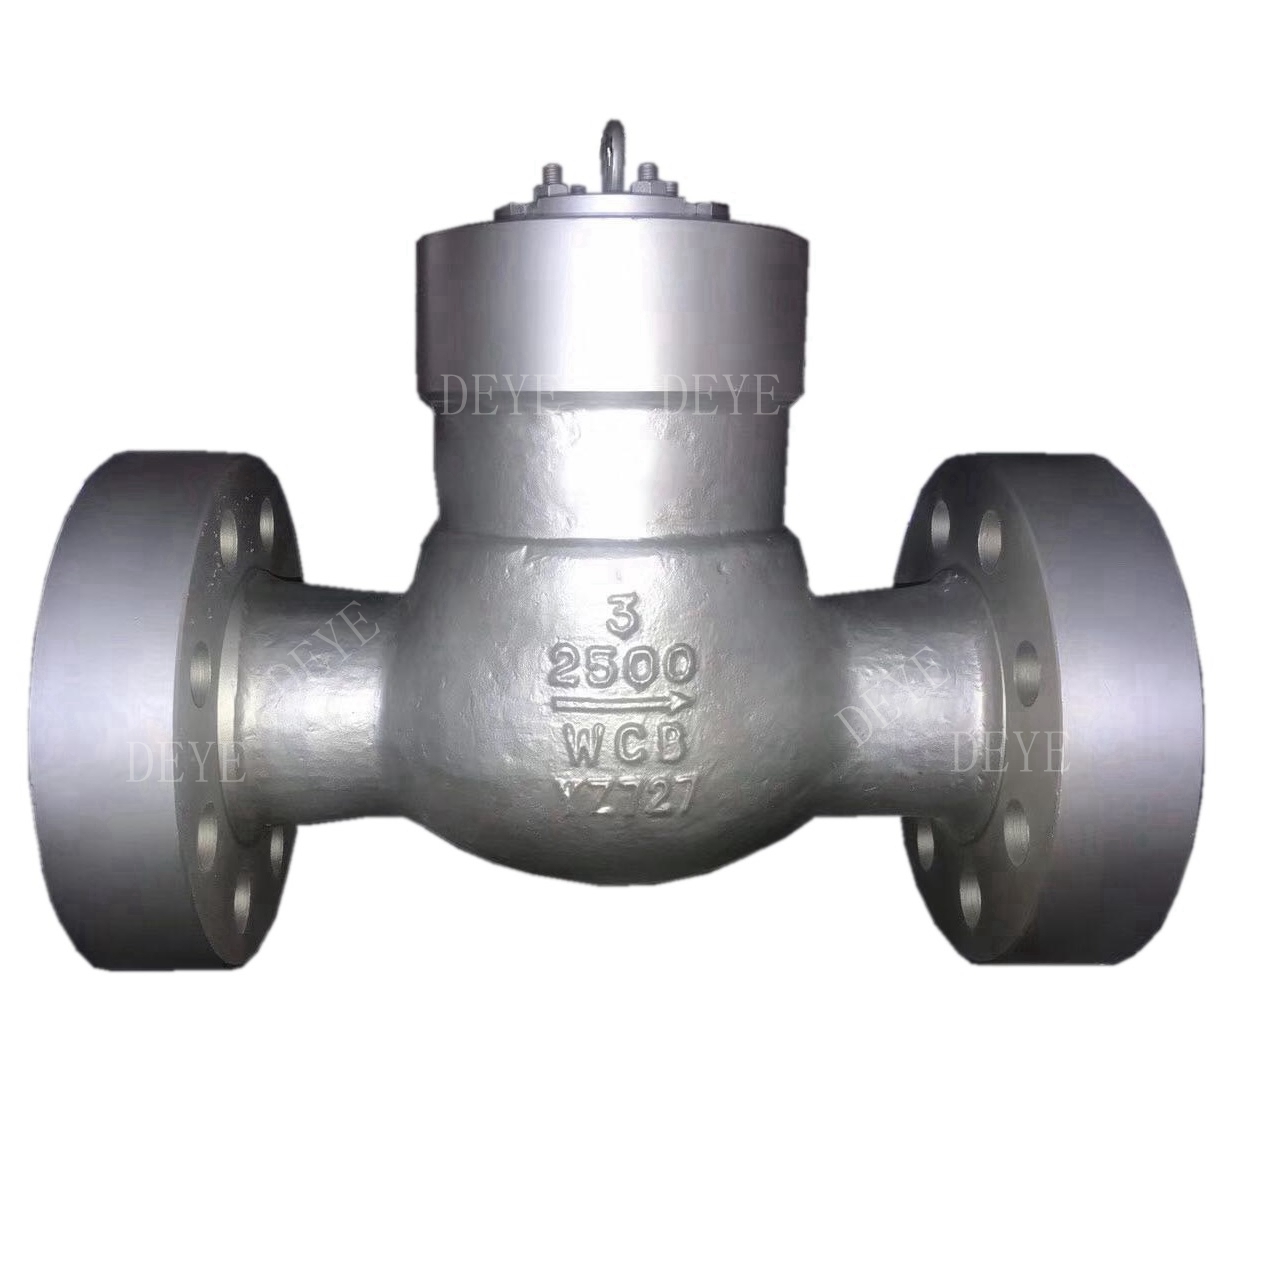 factory customized Ball Valve For Project -
 A216 WCB 2500LBS High Pressure Check Valve CVC-002500-3 – Deye